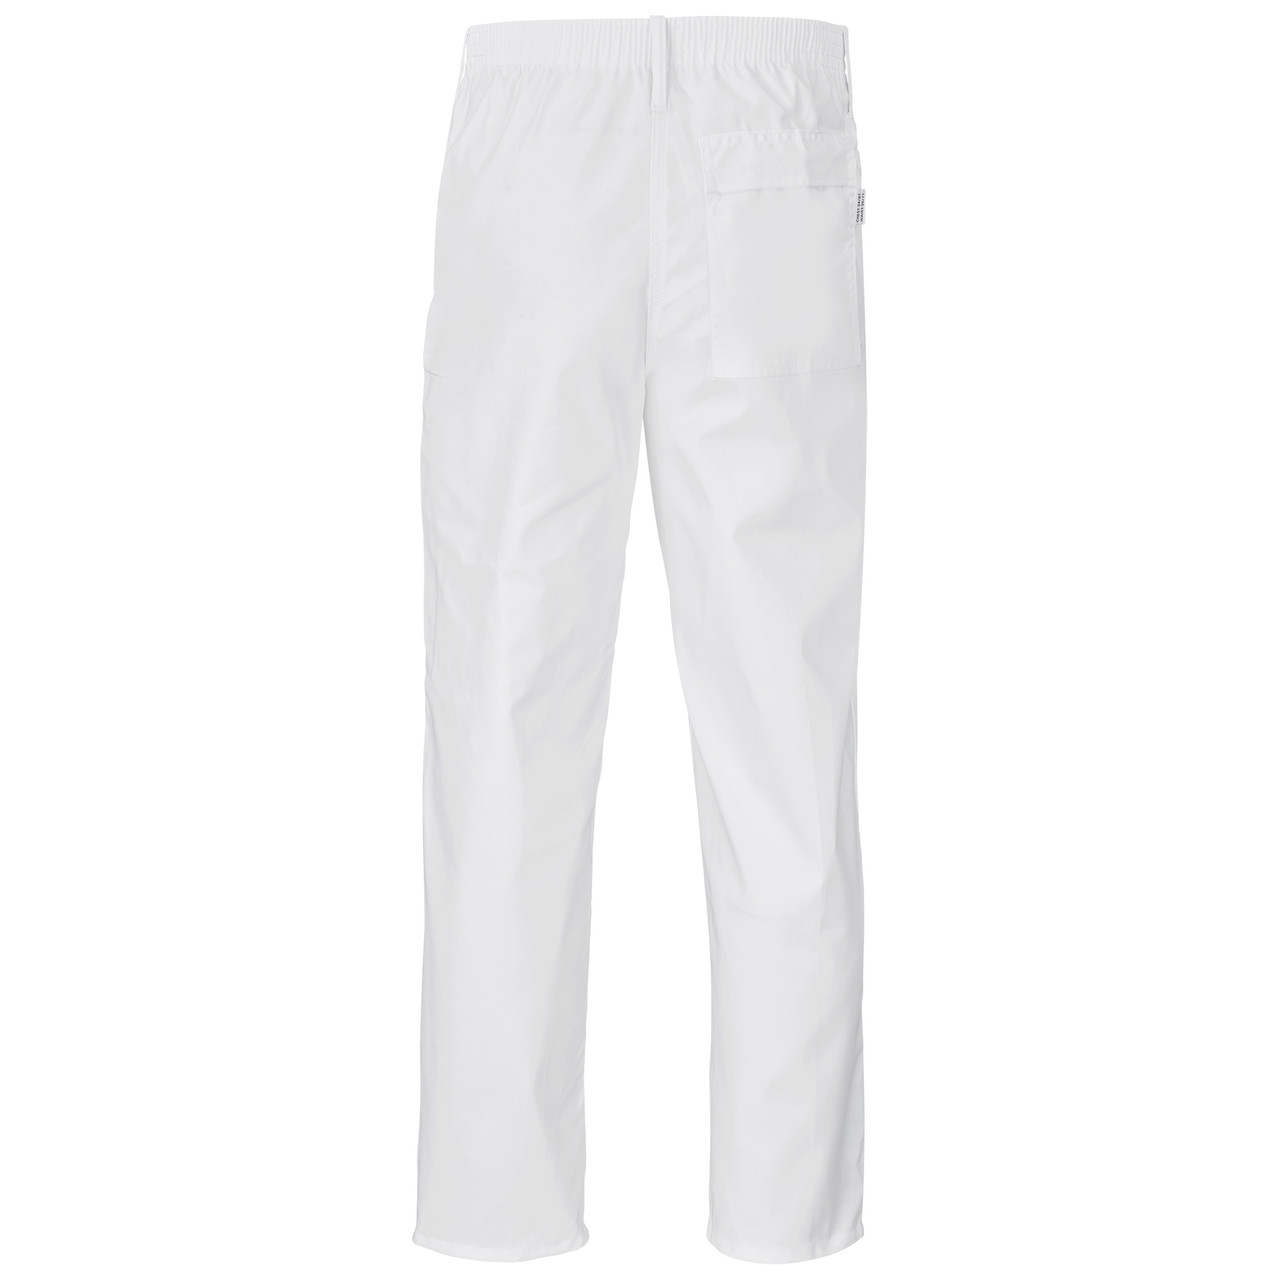 Food Safety Pants | HACCP Workwear | Azulwear Cape Town, South Africa